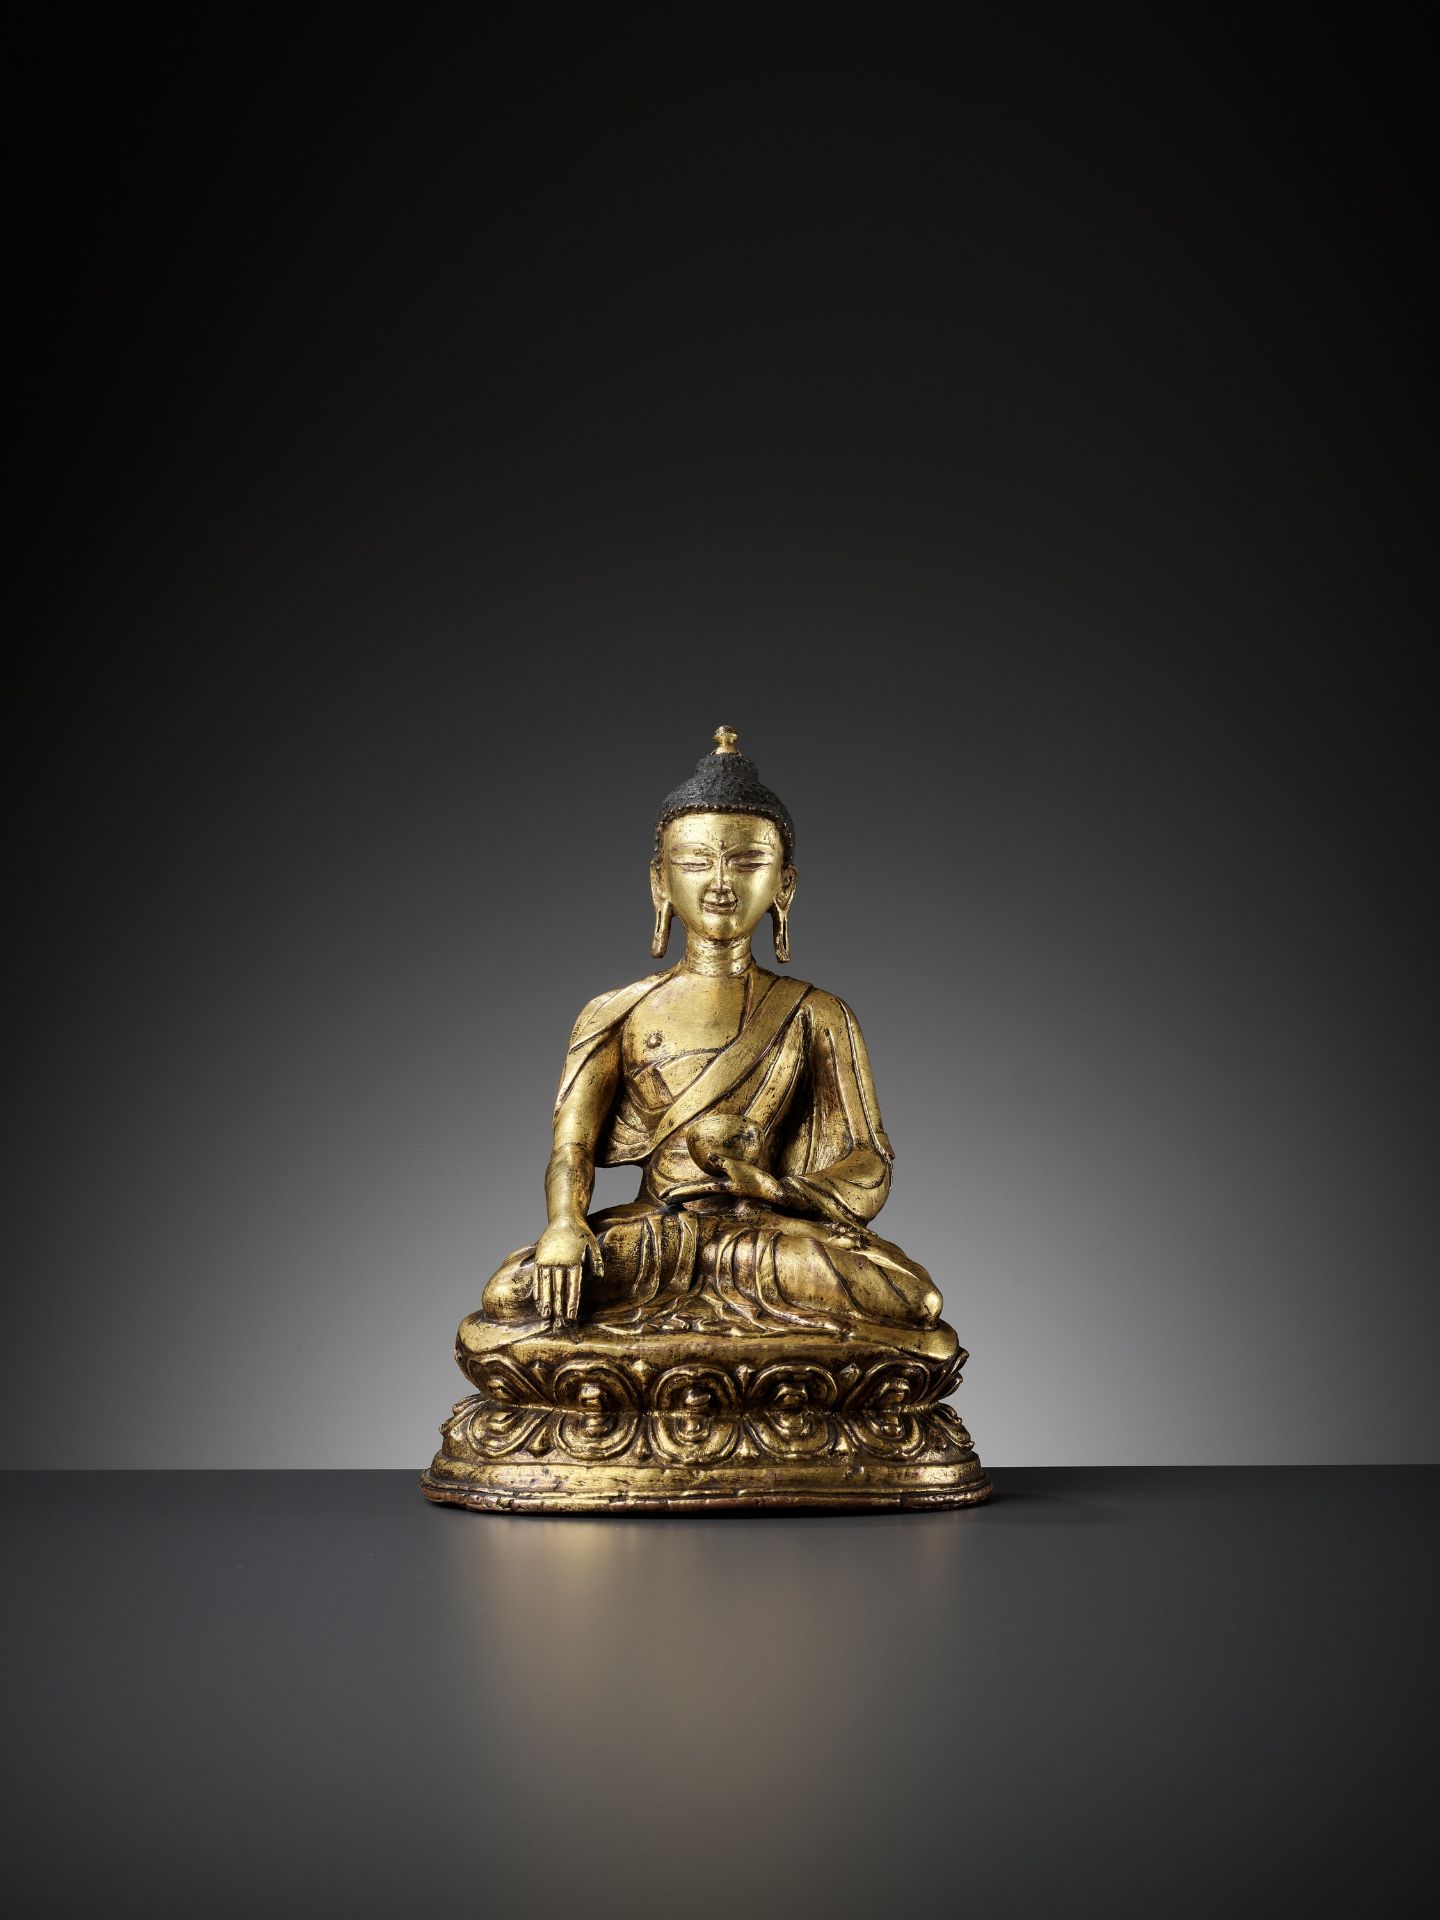 A GILT COPPER ALLOY FIGURE OF BUDDHA, 11TH-12TH CENTURY - Image 11 of 17